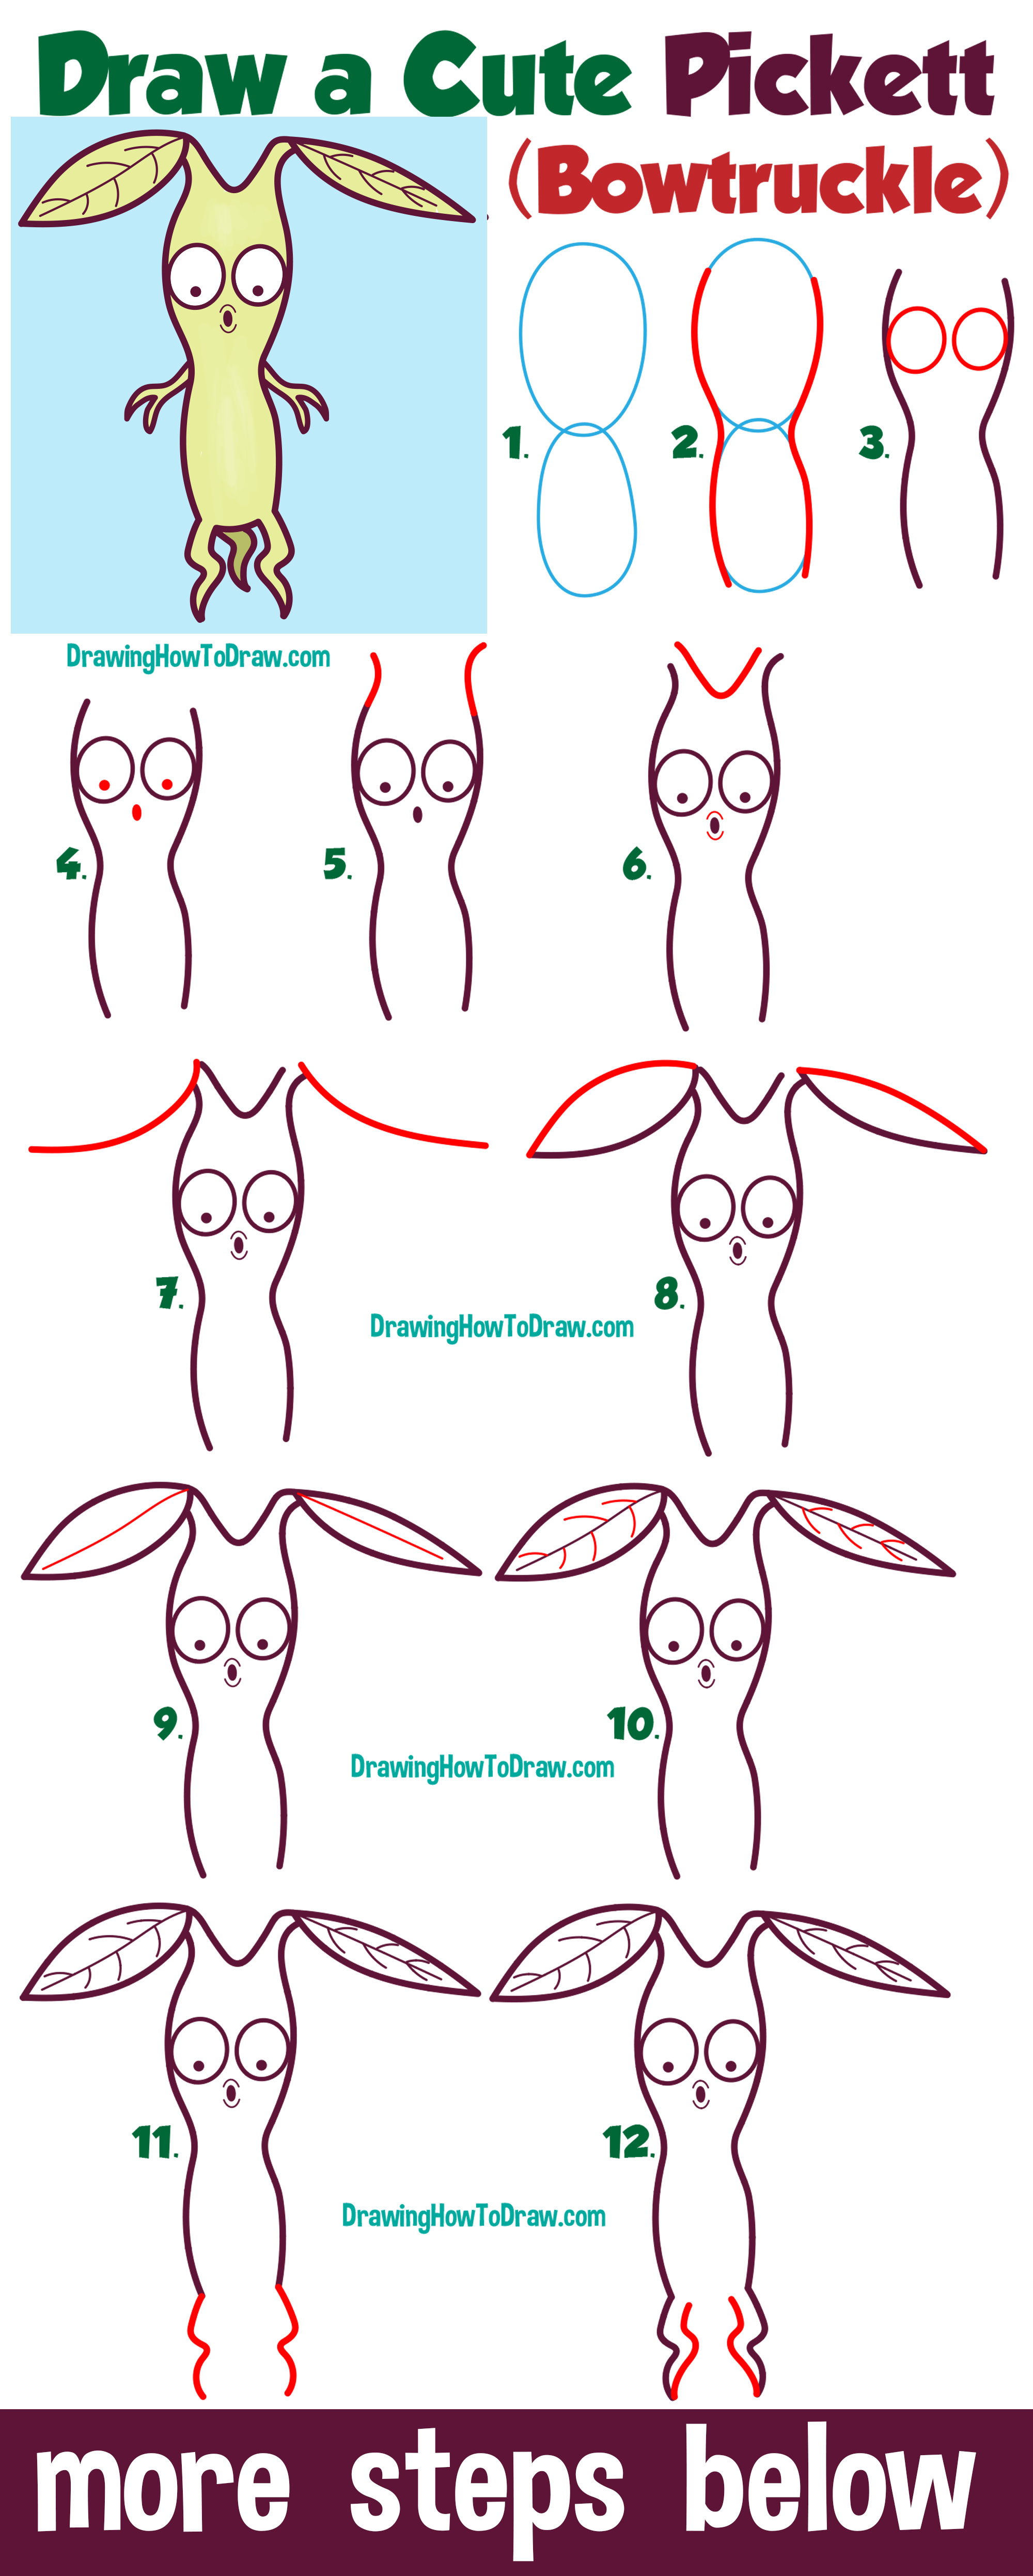 Learn How to Draw a Cute Pickett / Bowtruckle from Fantastic Beasts + Harry Potter (Chibi / Kawaii) Easy Step by Step Drawing Tutorial for Beginners